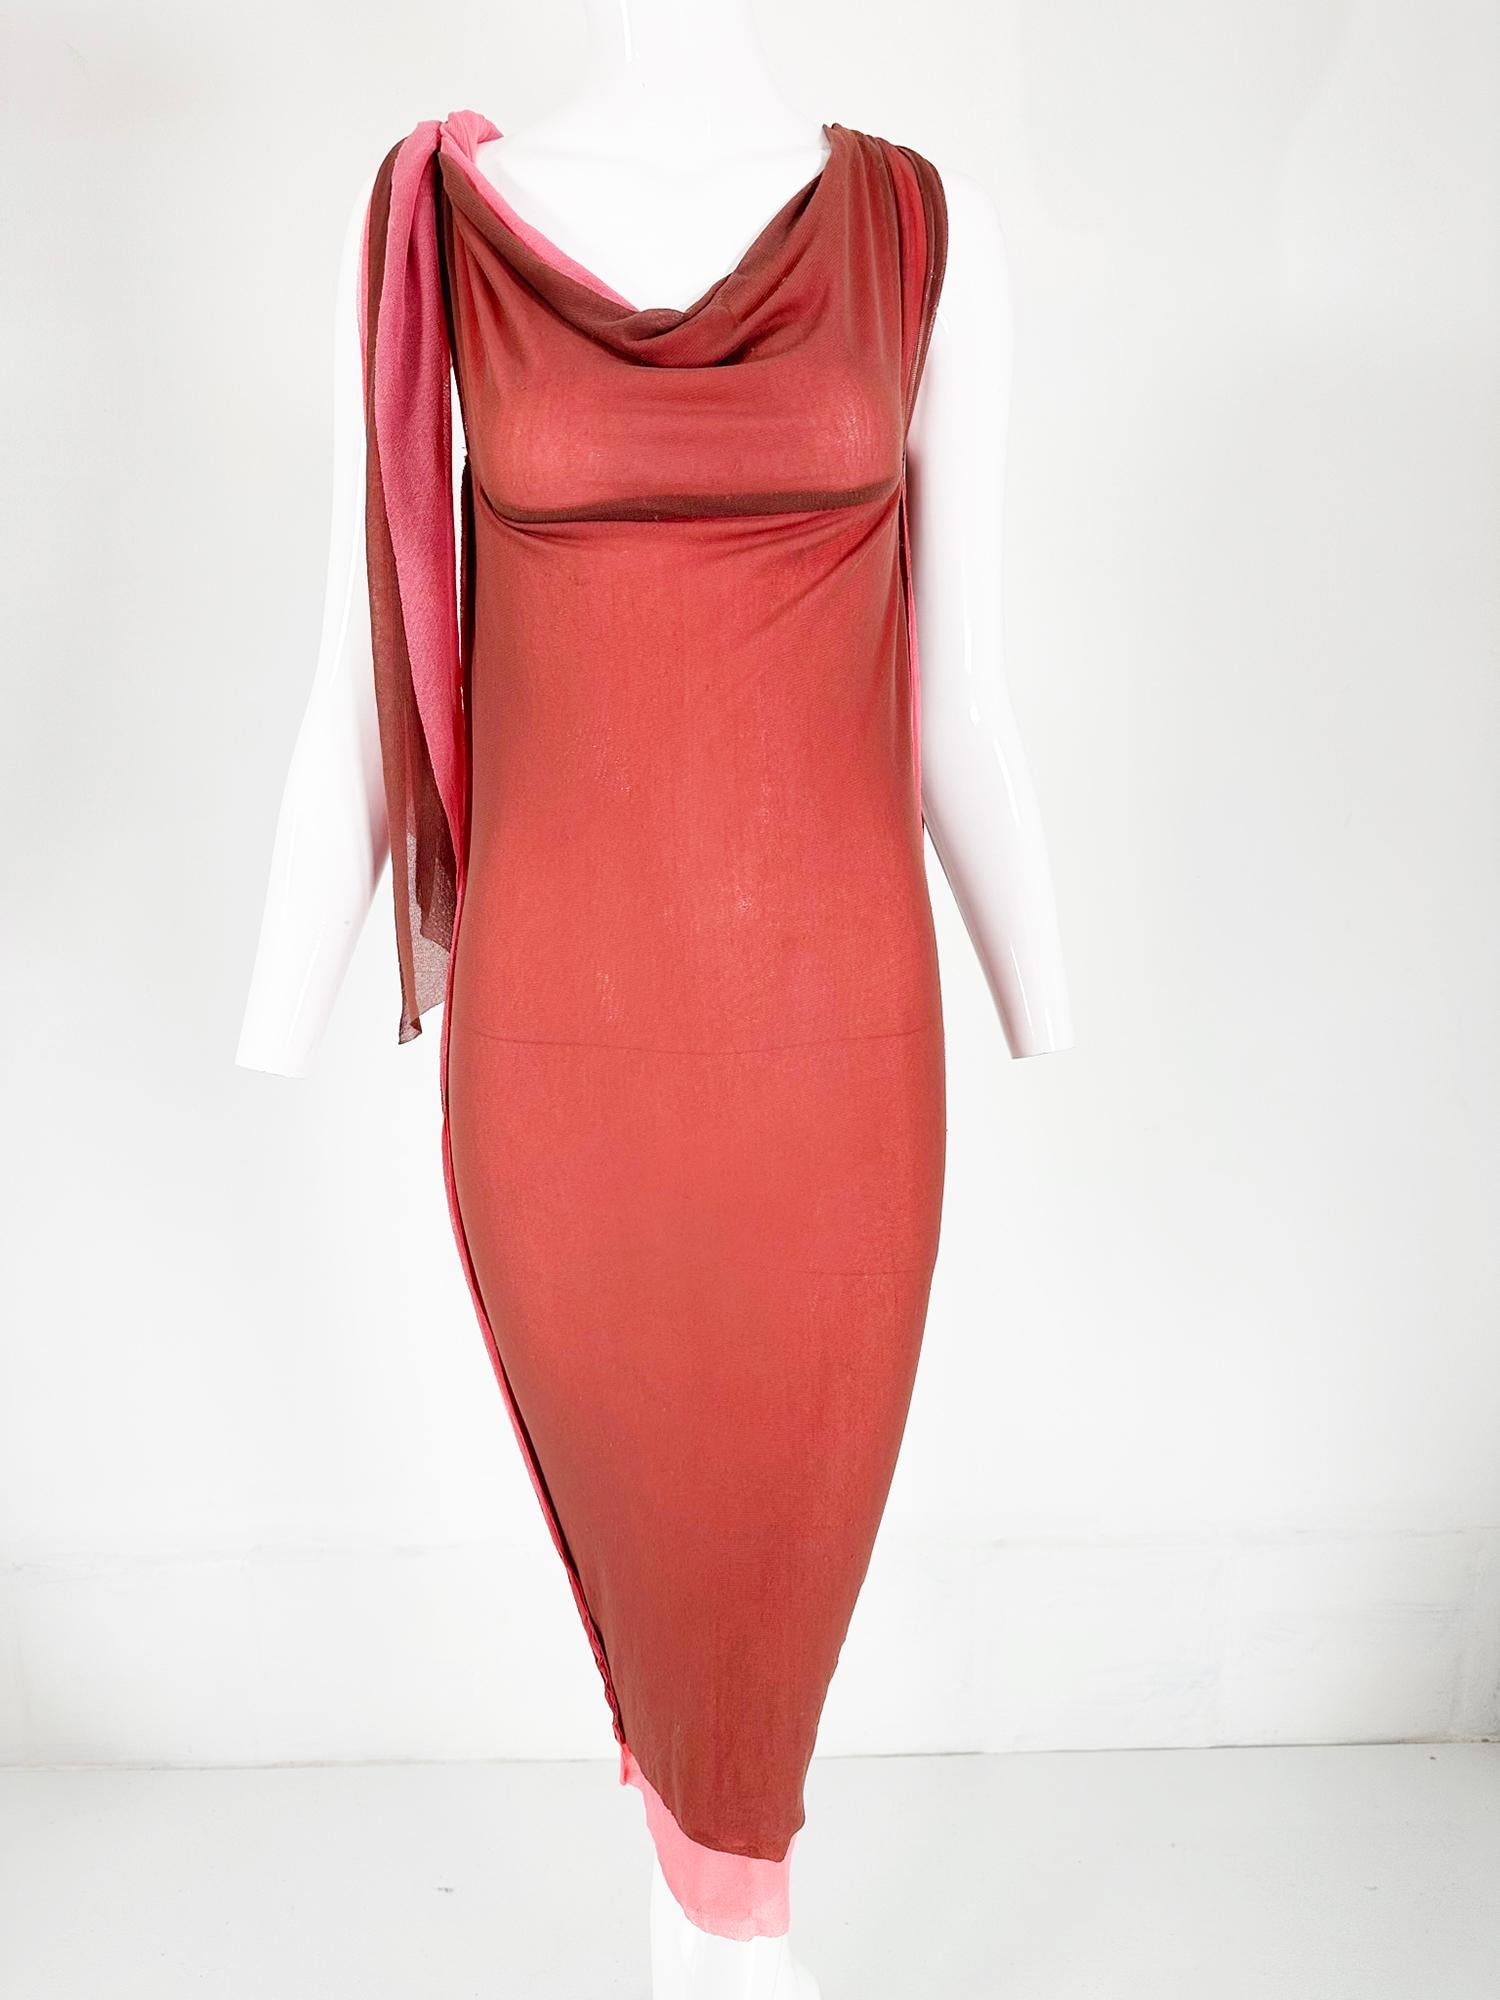 Jean Paul Gaultier Maille coral pink & brown sheer mesh tube dress with ties. Bandeau top with long ties to wrap at the neck or around the top or however you choose. Simple tube pull on dress, with 2 layers in coral & brown, the seams are raw edge.